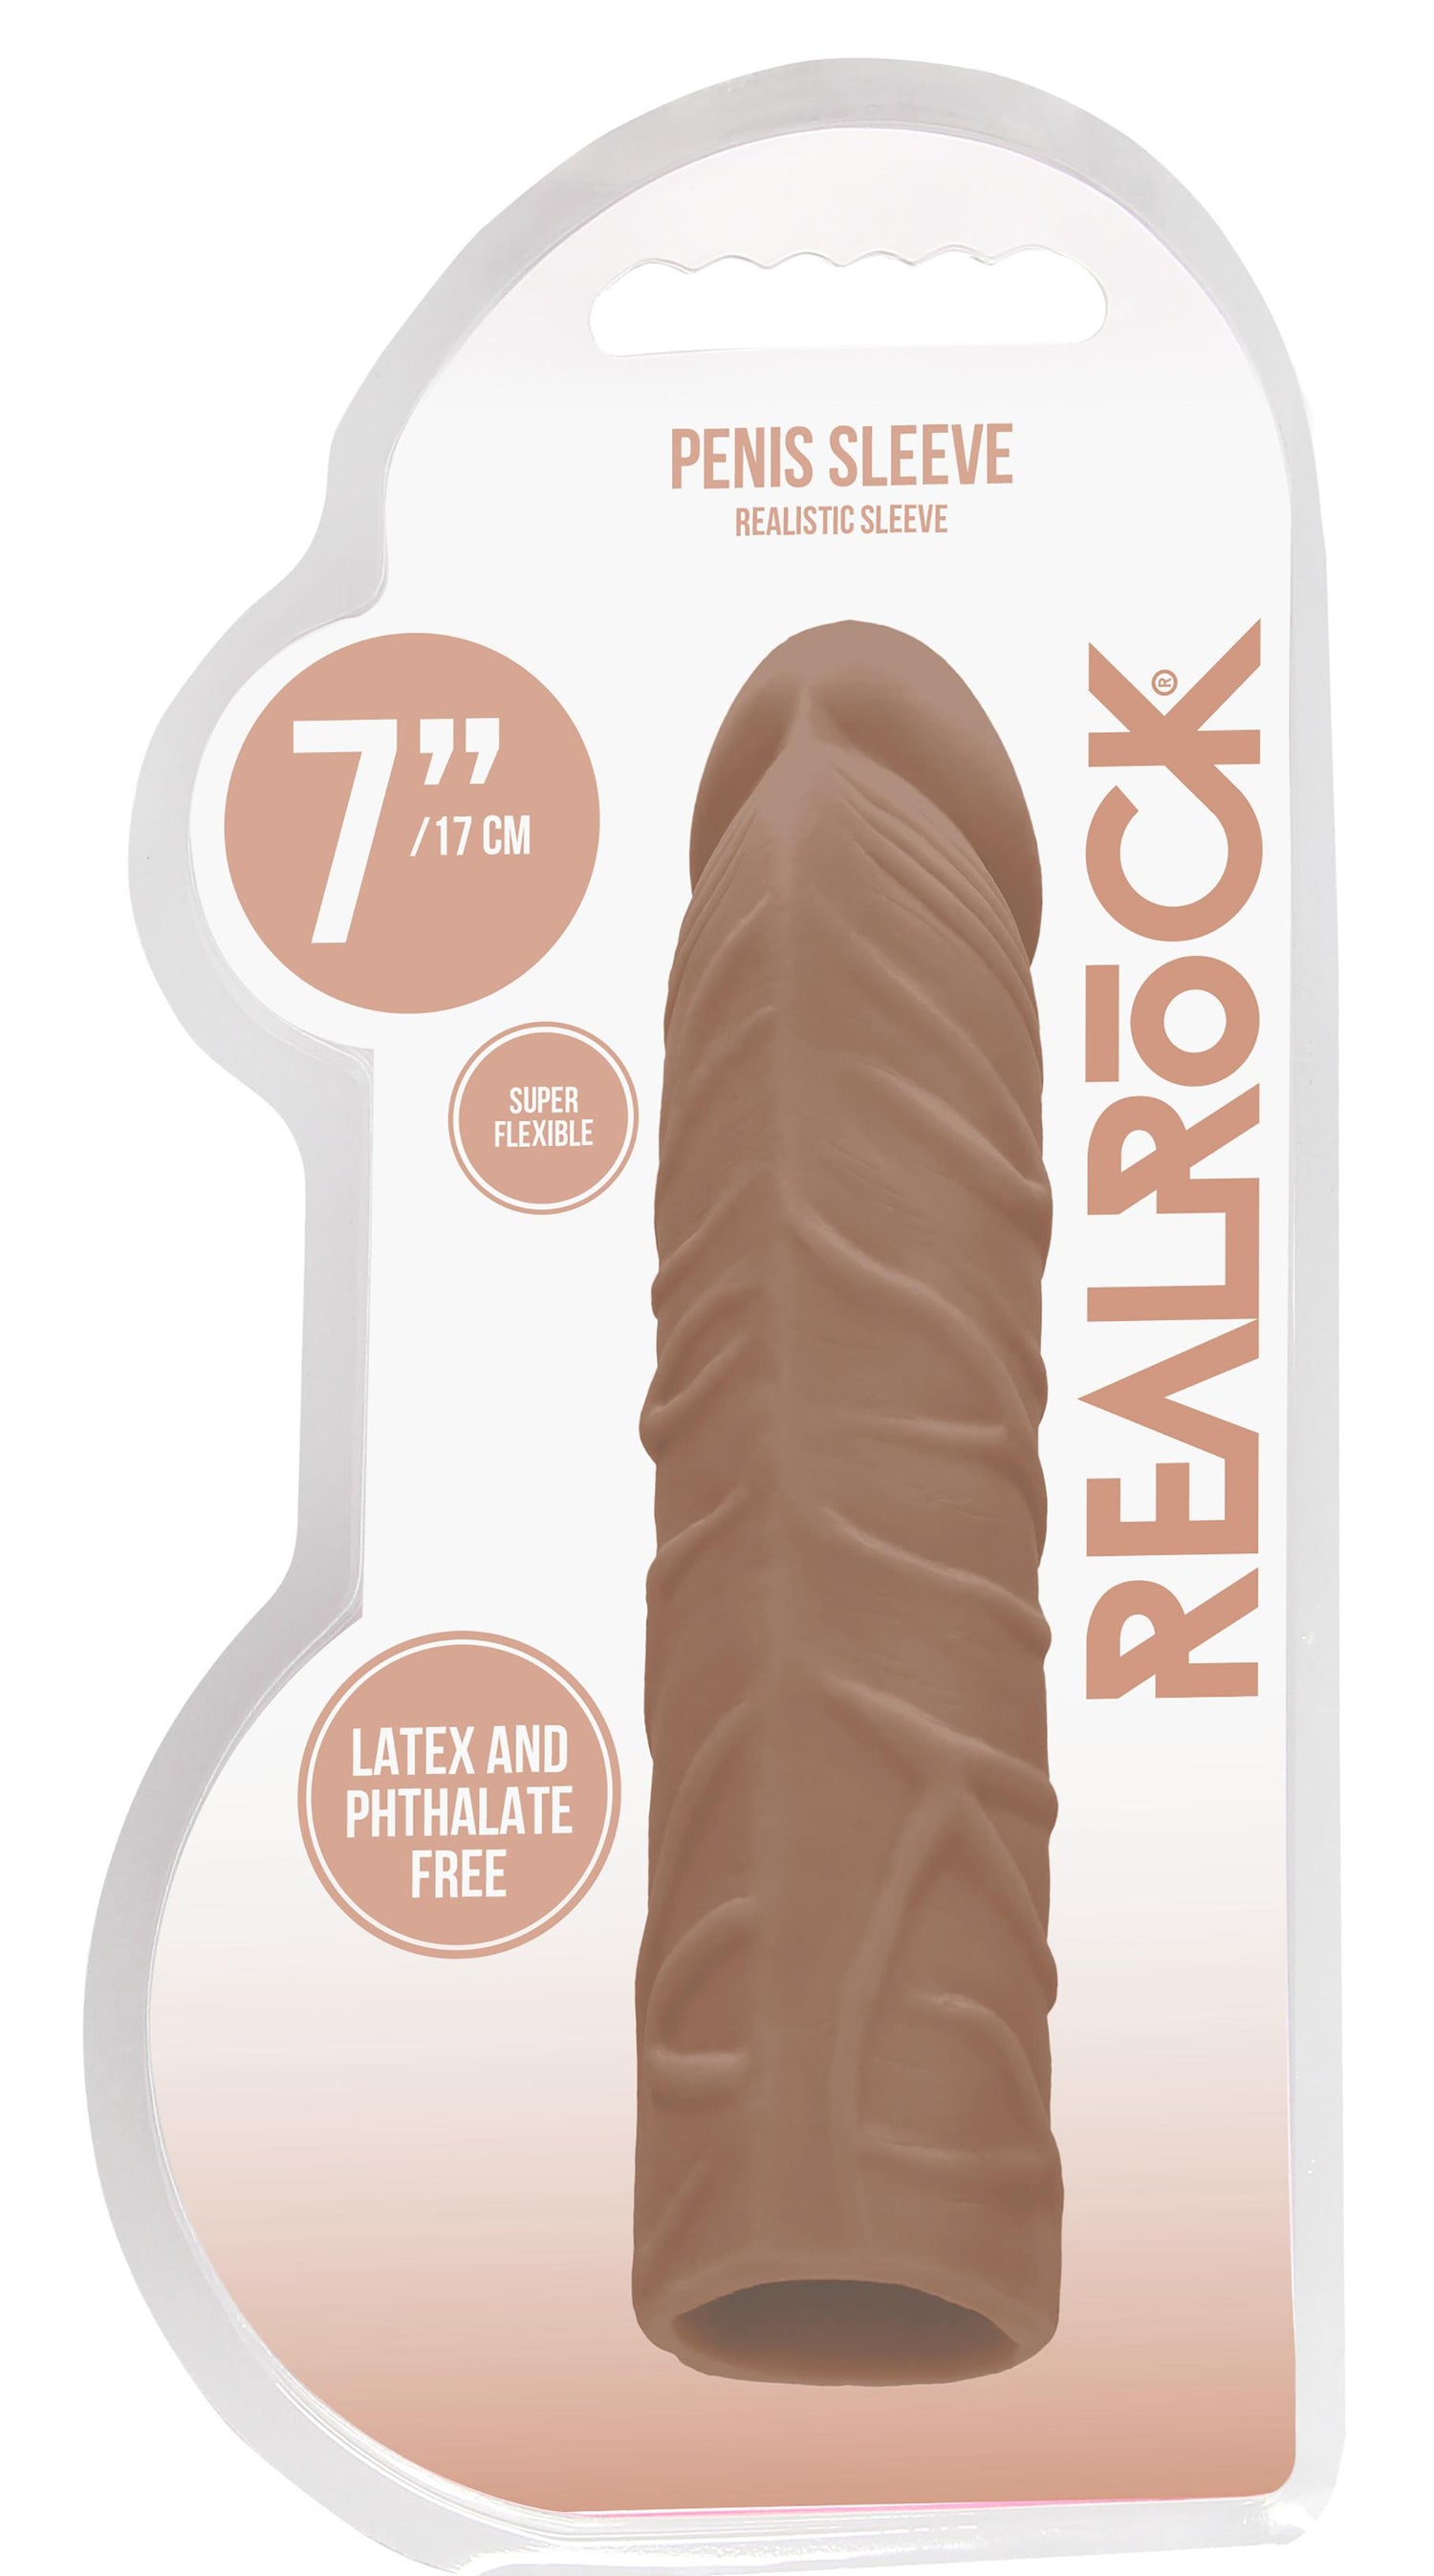 real 7 inch penis